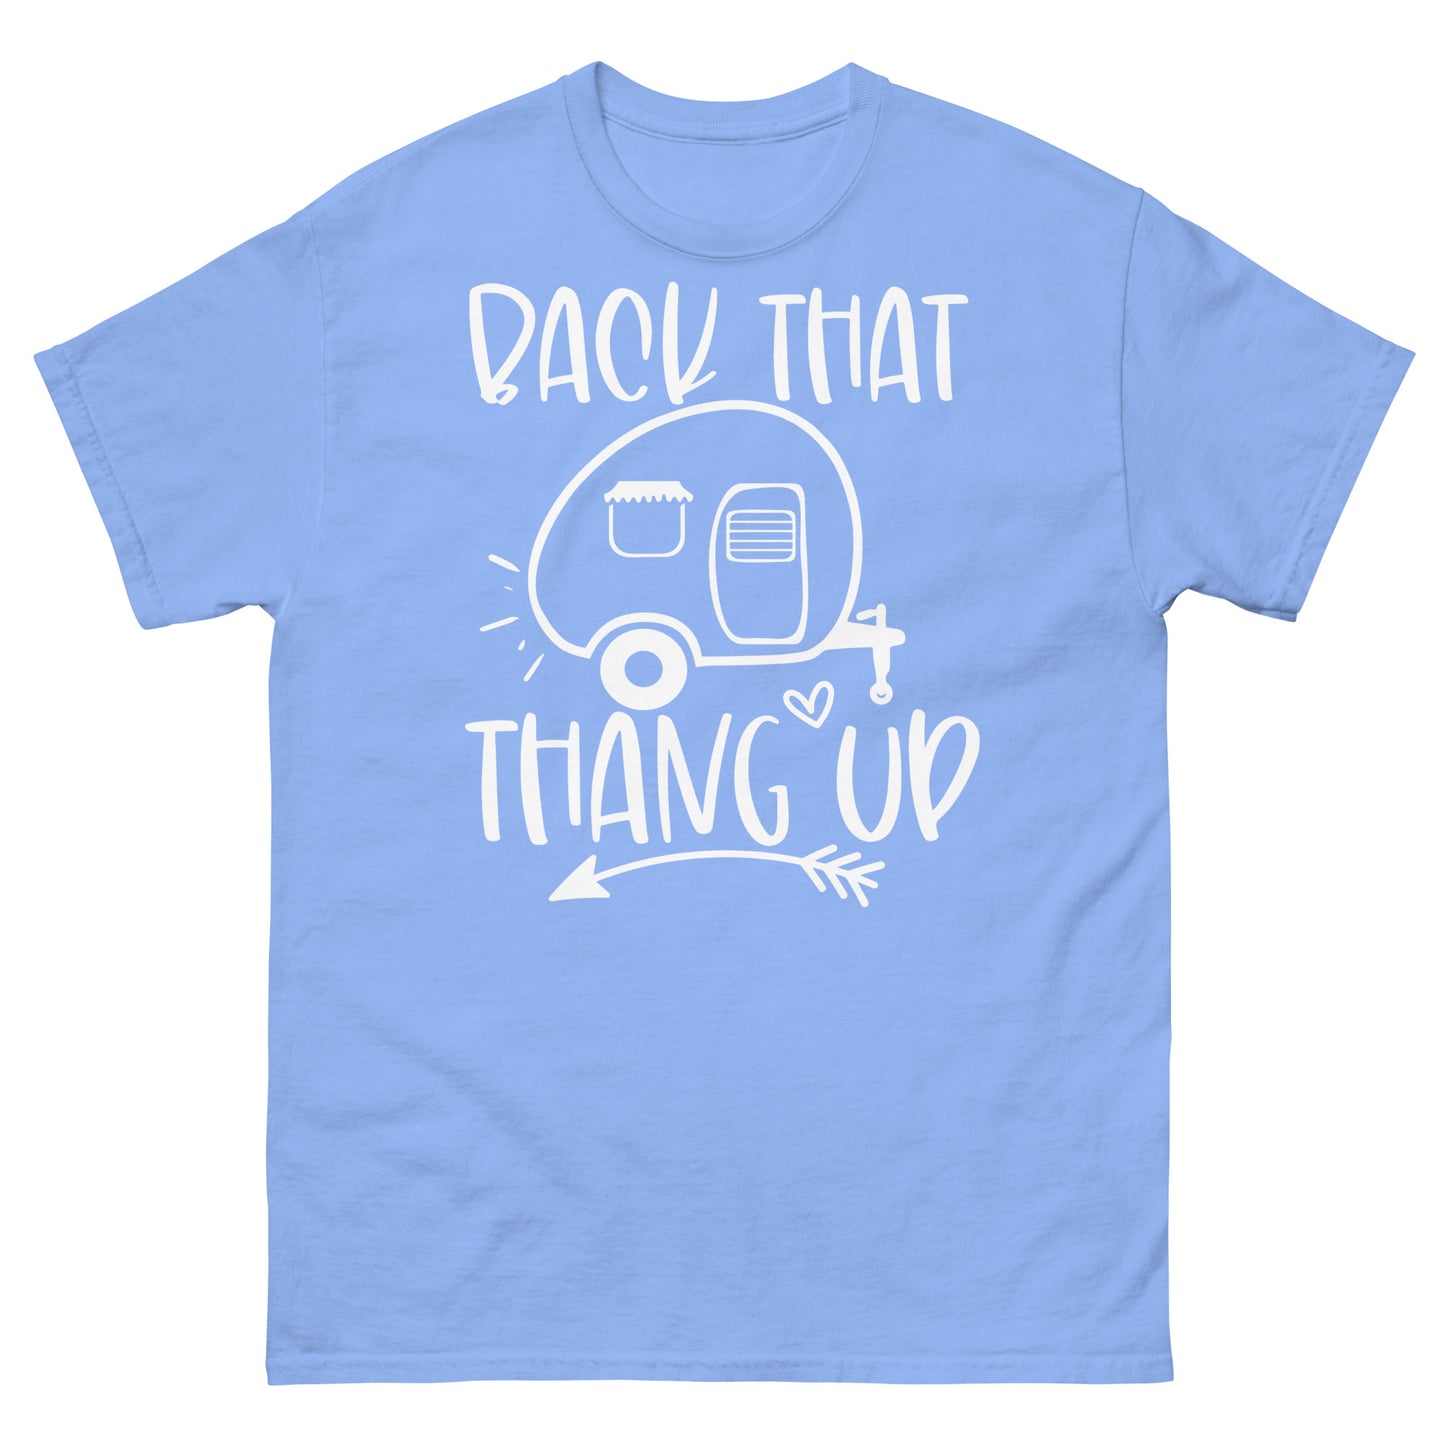 Back that thang up classic tee